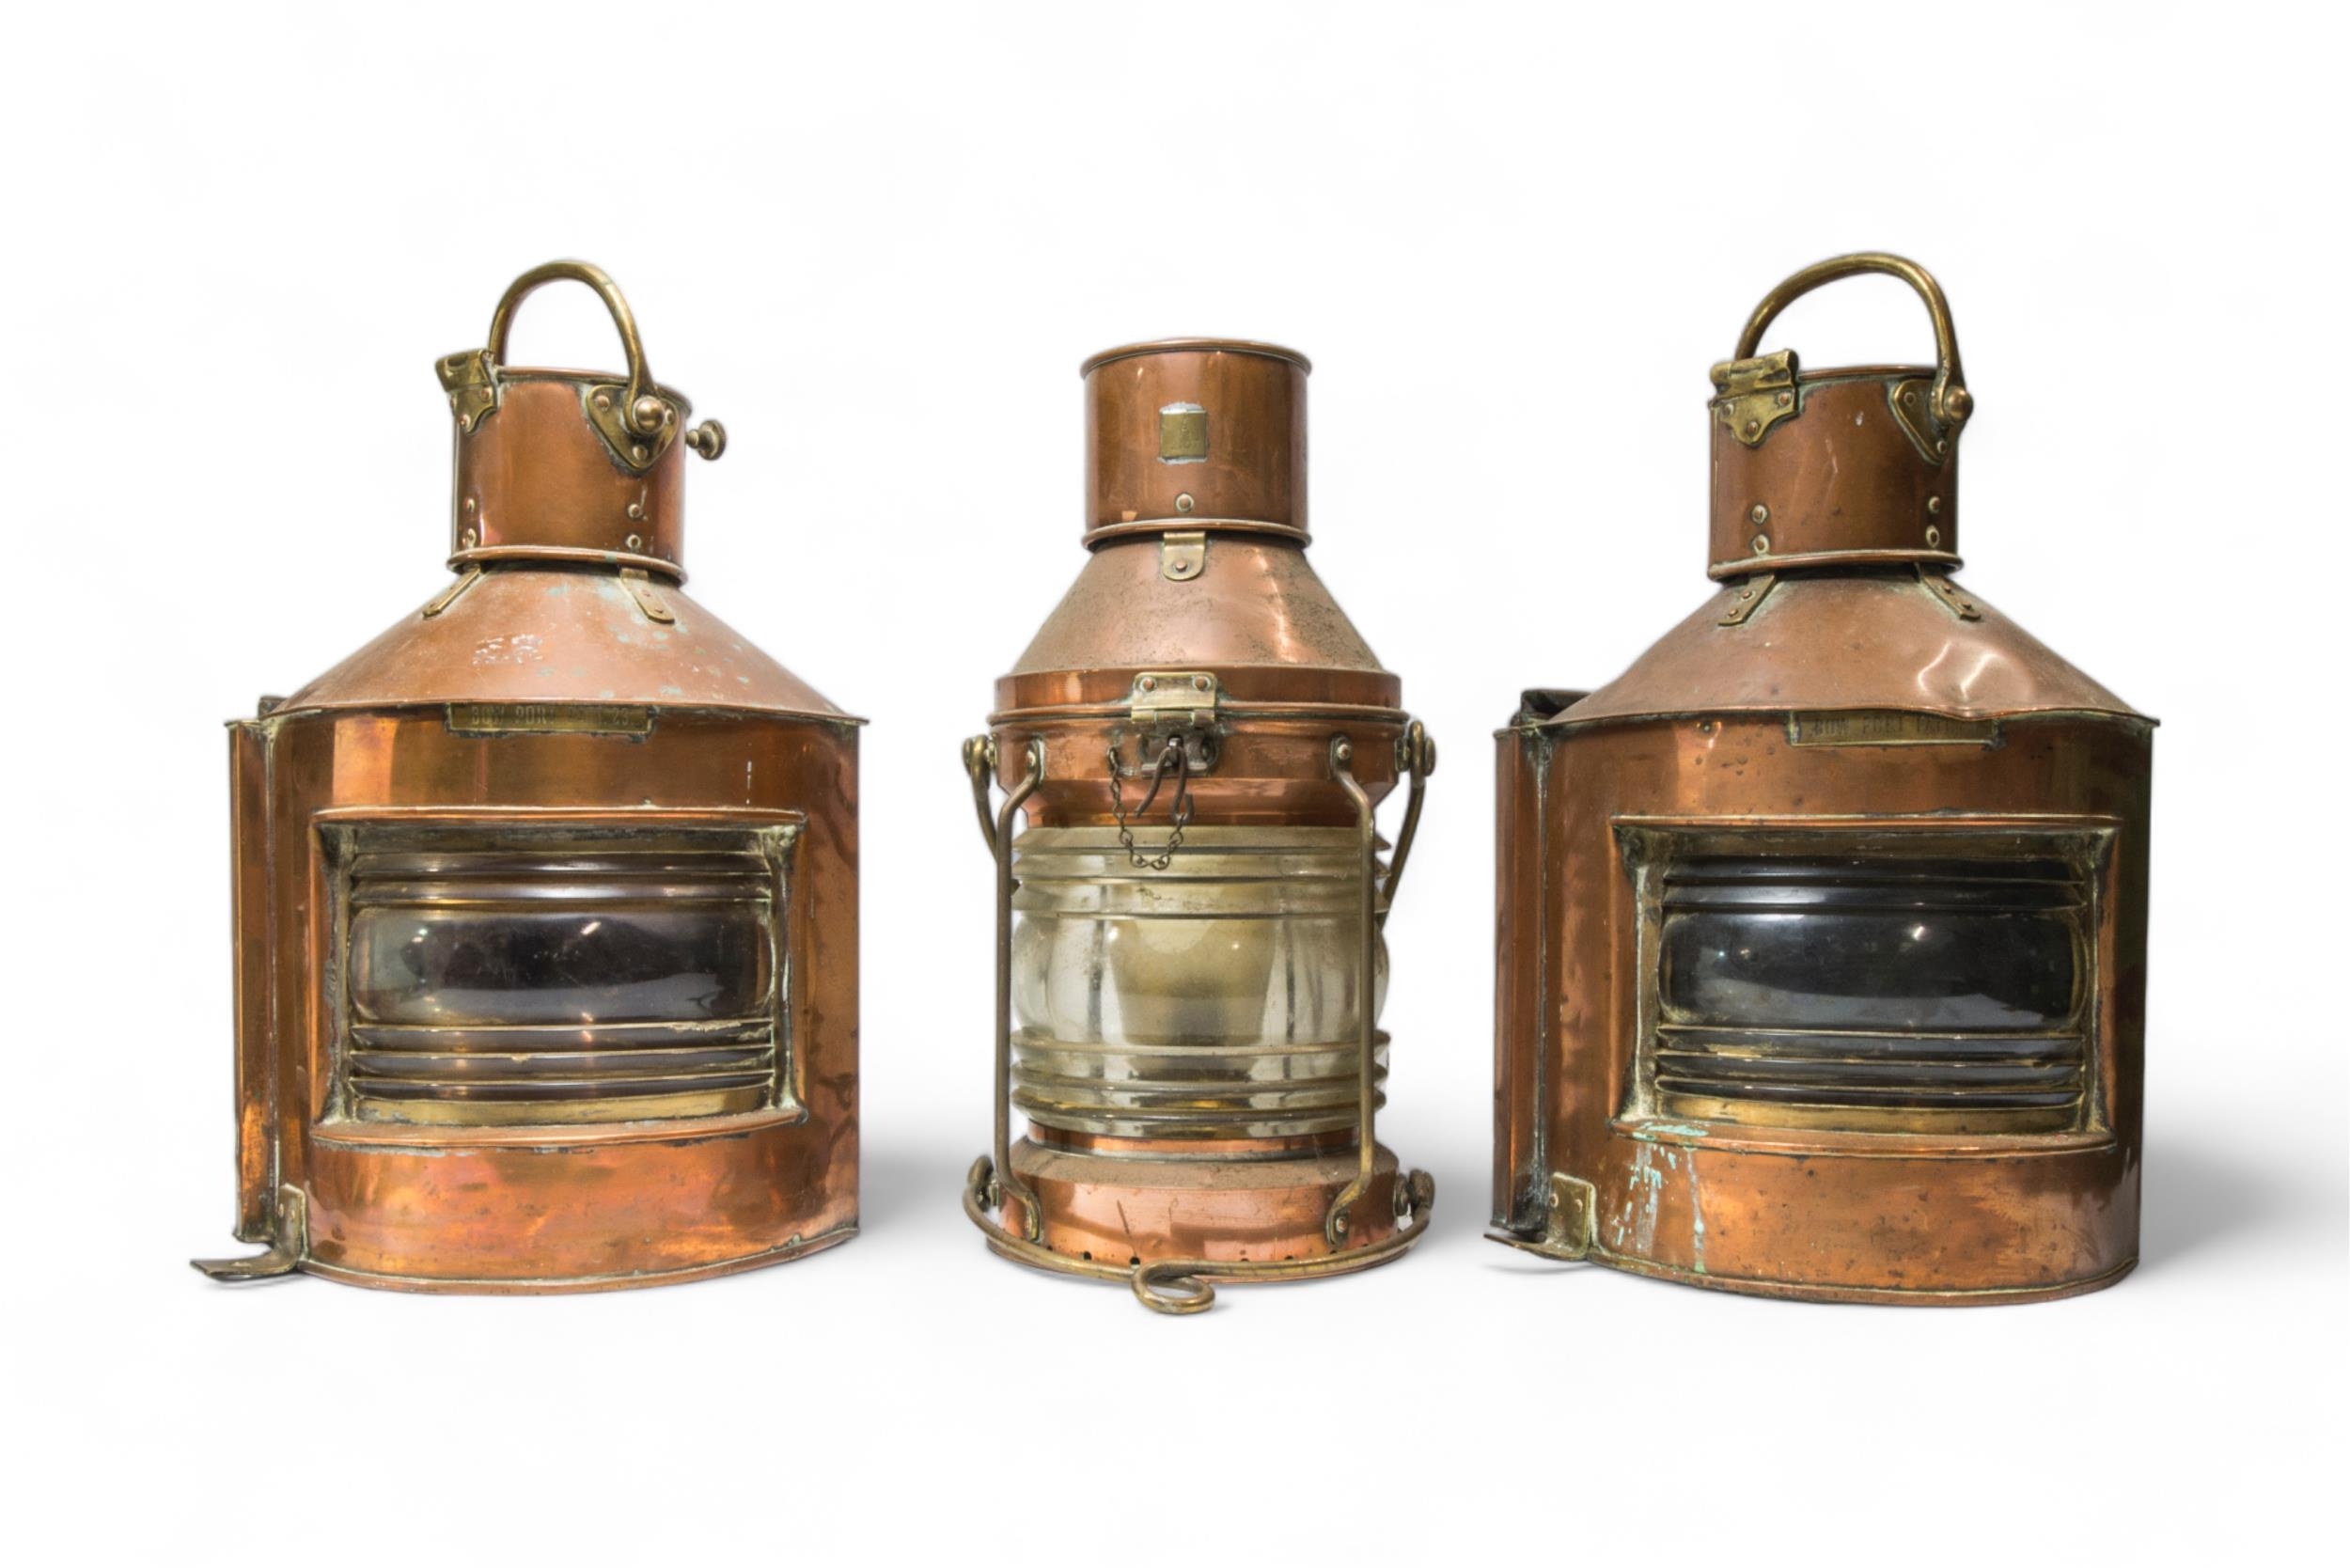 TWO MATCHING COPPER AND BRASS BOAT LANTERNS with plaques for ‘Bow Port Patt 23’ and makers stamped - Image 3 of 3